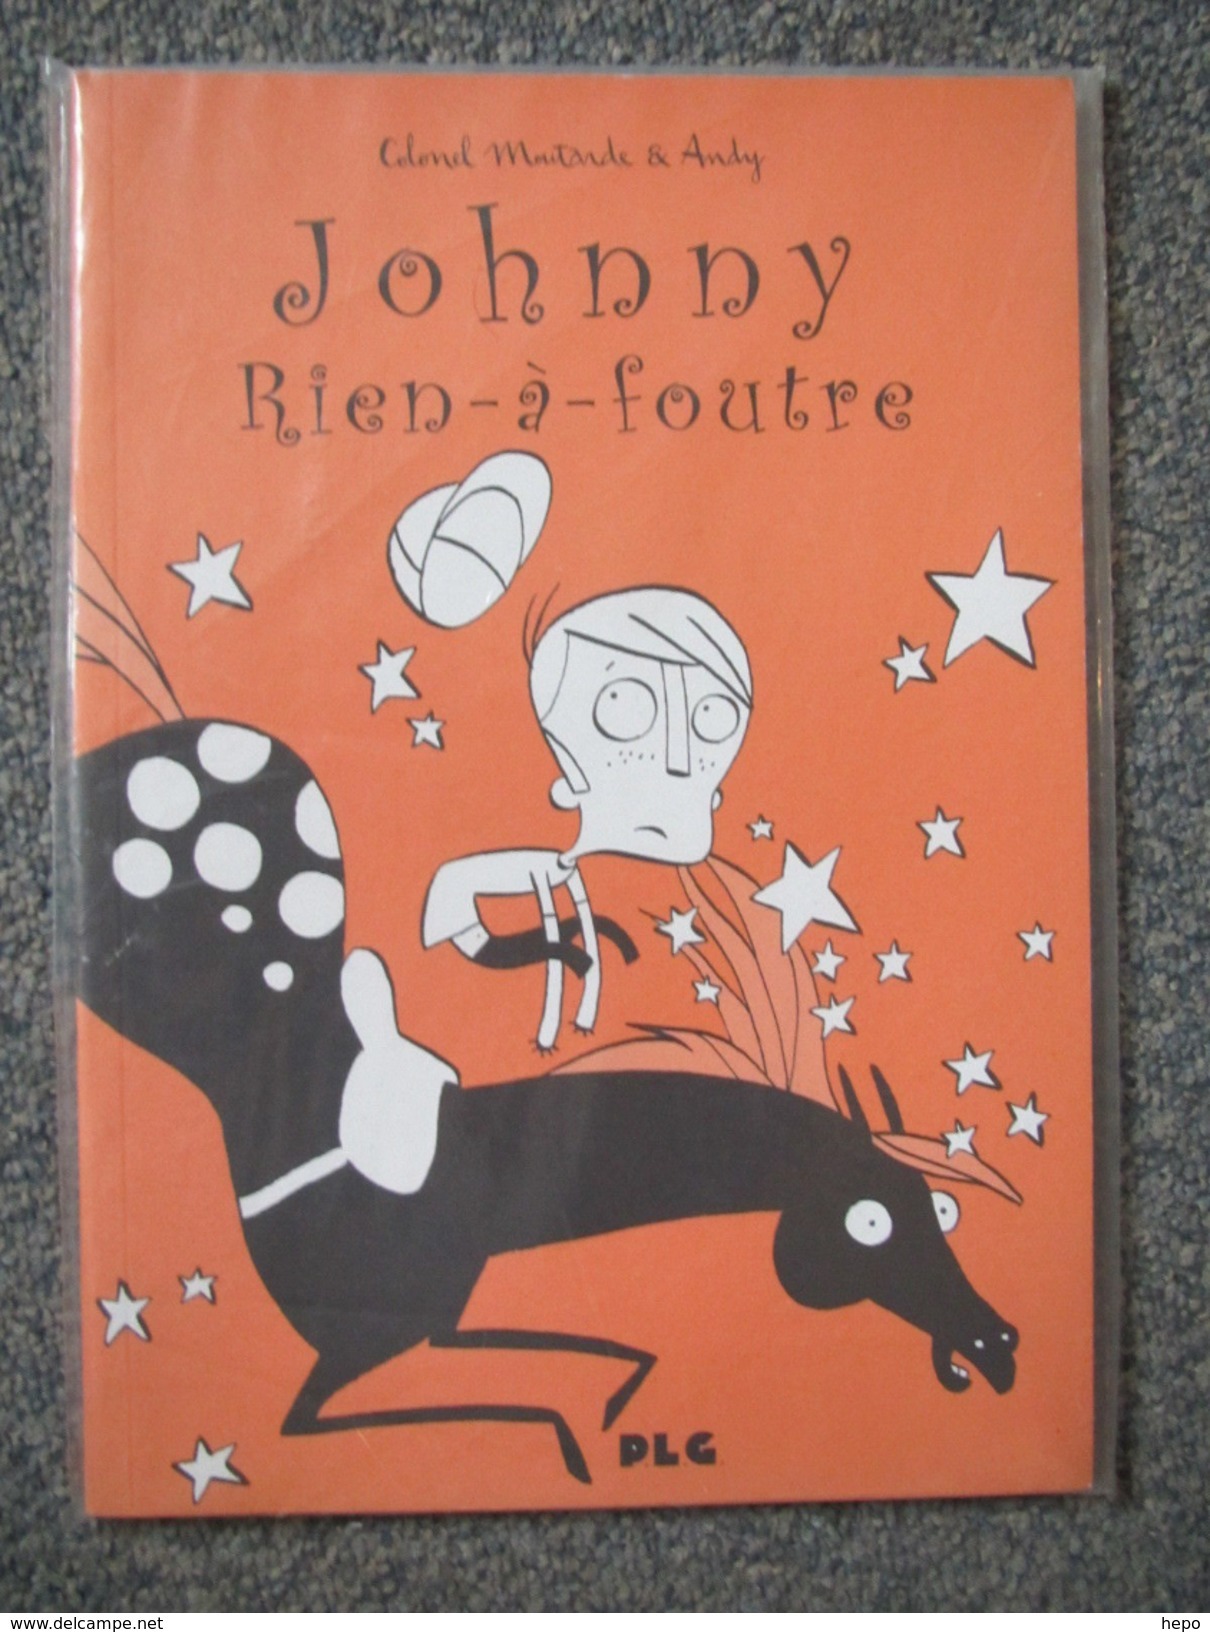 Colonel Moutarde - RARE Johnny Rien A Foutre - BD EO - First Copies